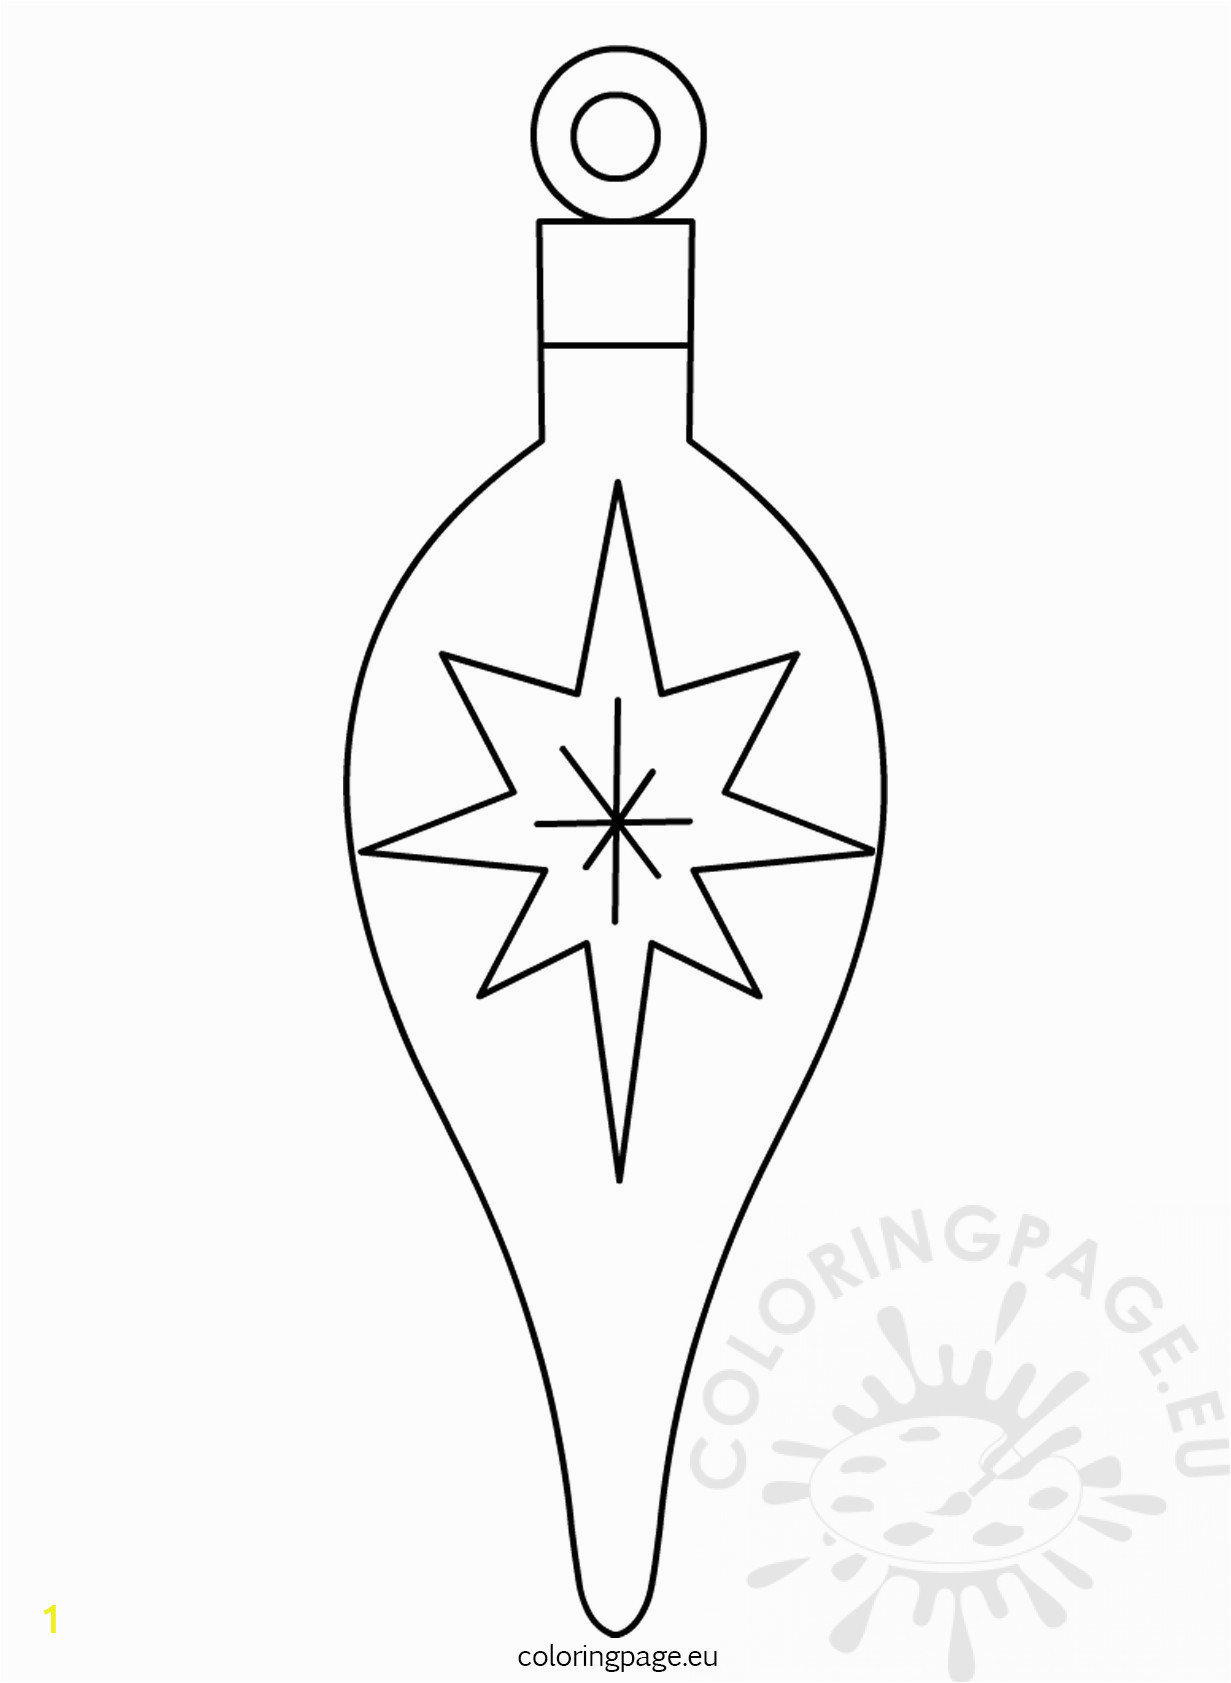 liberty bell coloring page printable candy cane blanktmas ornament grinch hand holding printables star free pages christmas tree ornaments at drawings top killer